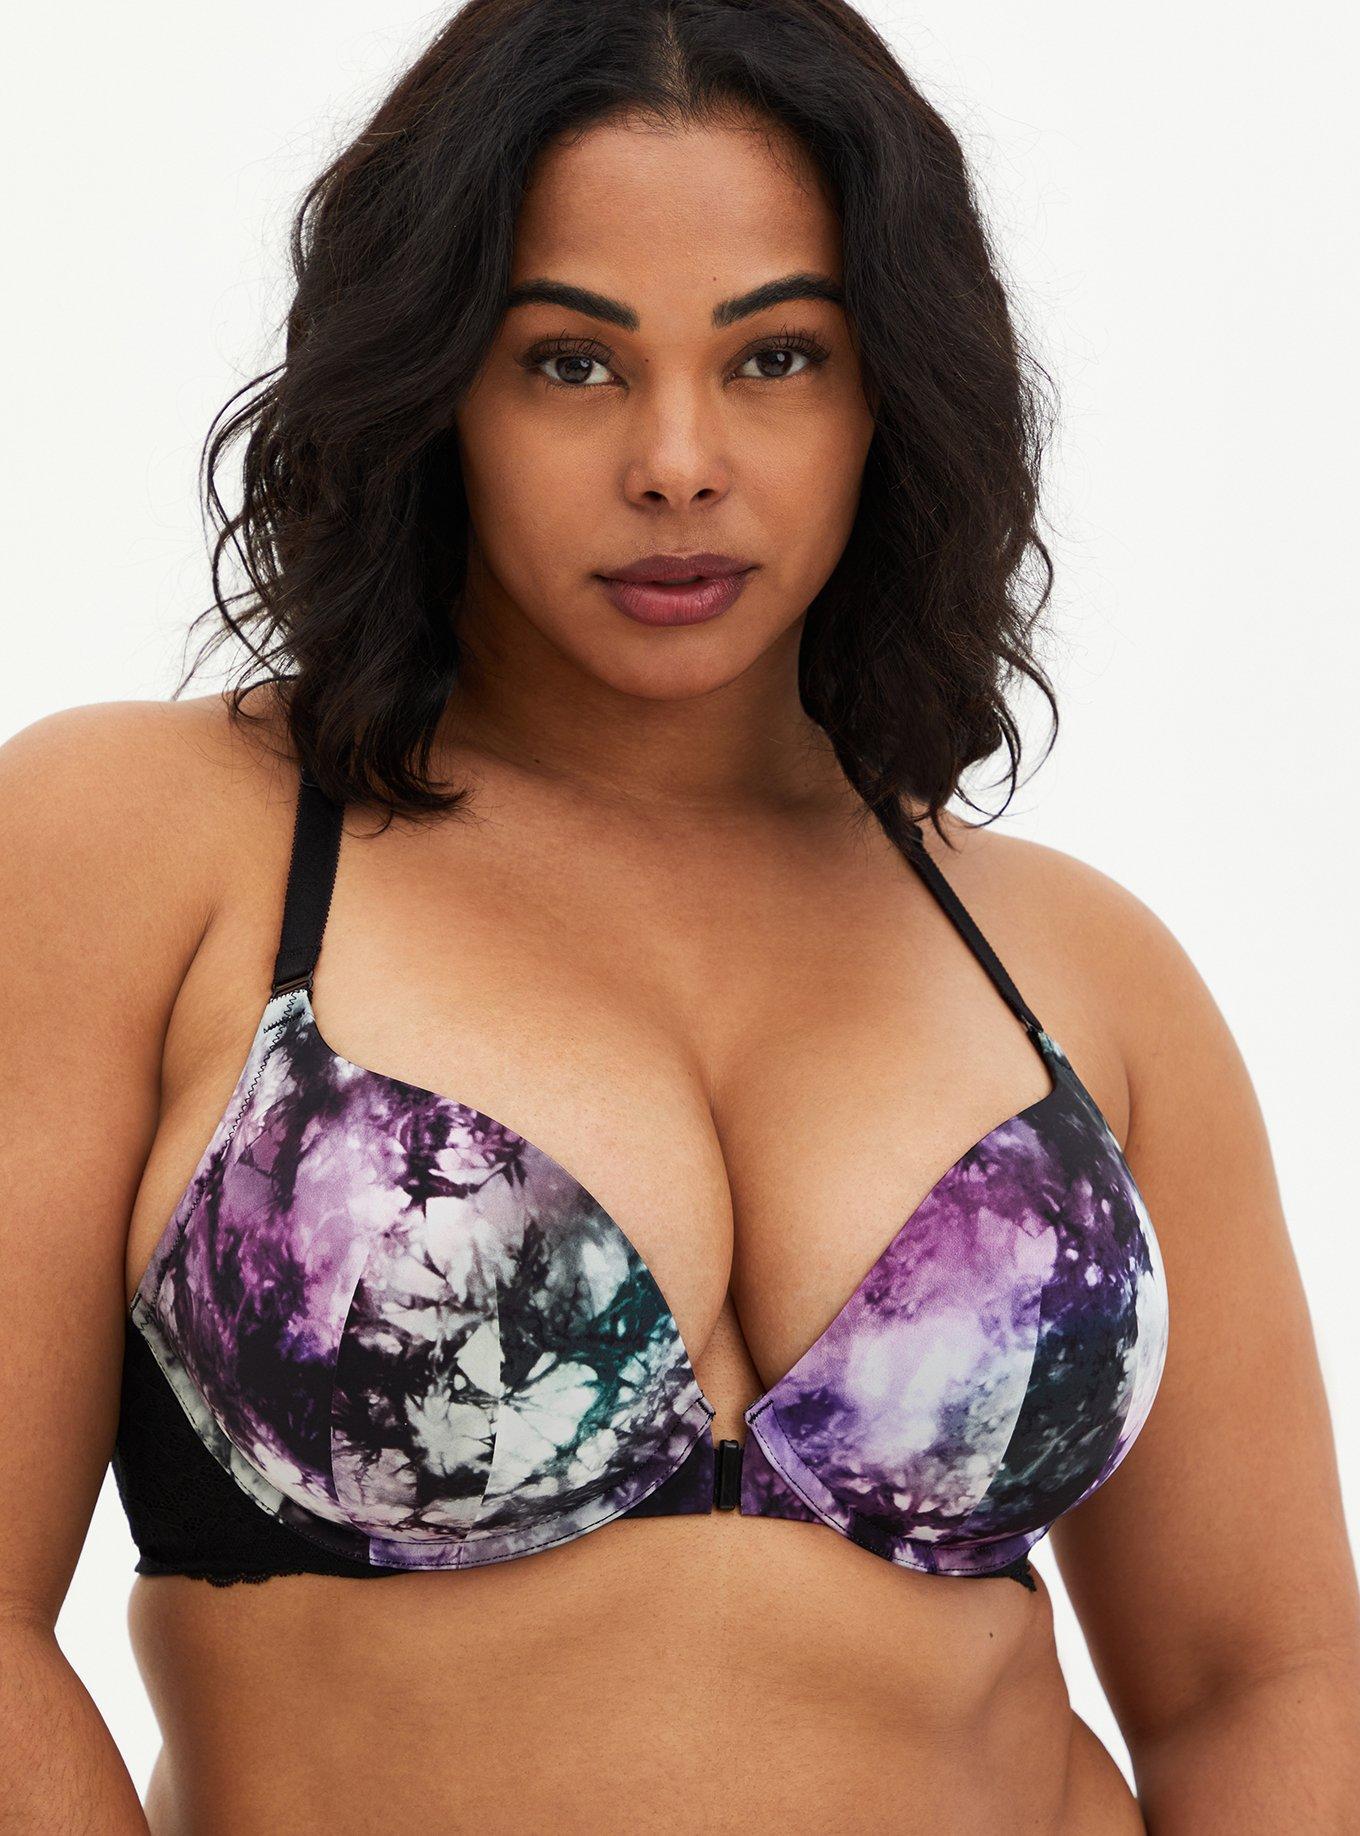 Torrid Bra Push Up Plunge 46D Underwire Maroon Green Floral Adjustable  Straps Size undefined - $21 - From Deana